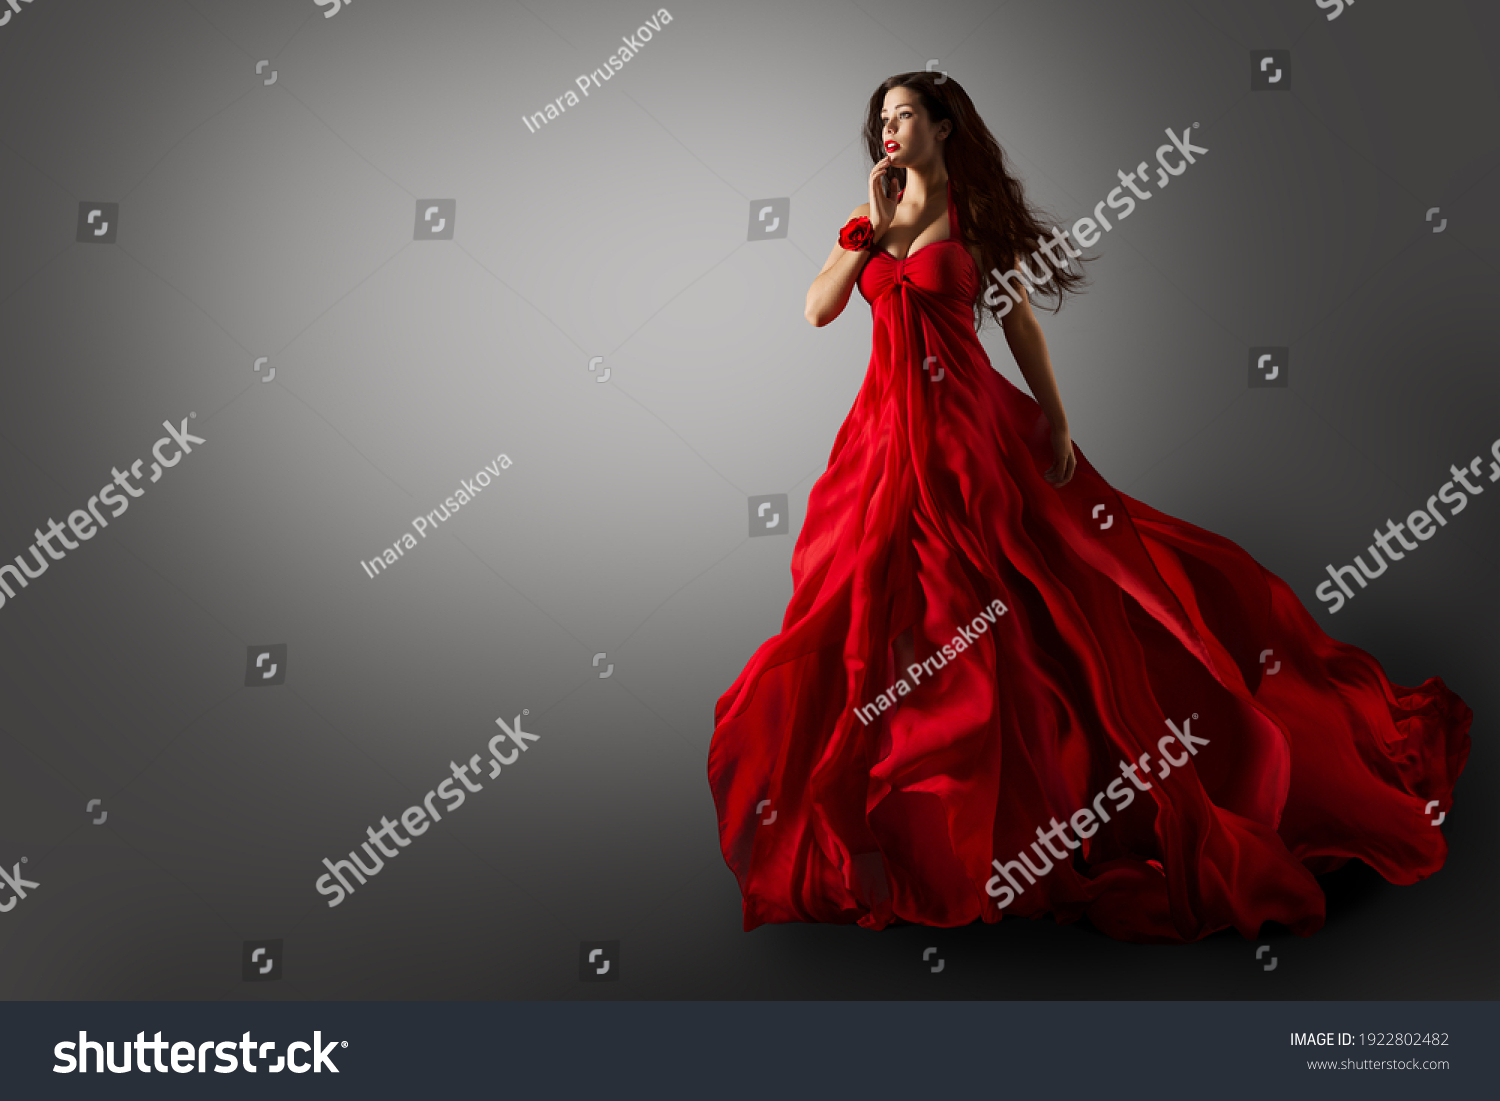 Fashion Woman in Red Dress. Beauty Model dancing in Long Evening Gown fluttering on Wind Black Hair flying in Air over Gray Background #1922802482